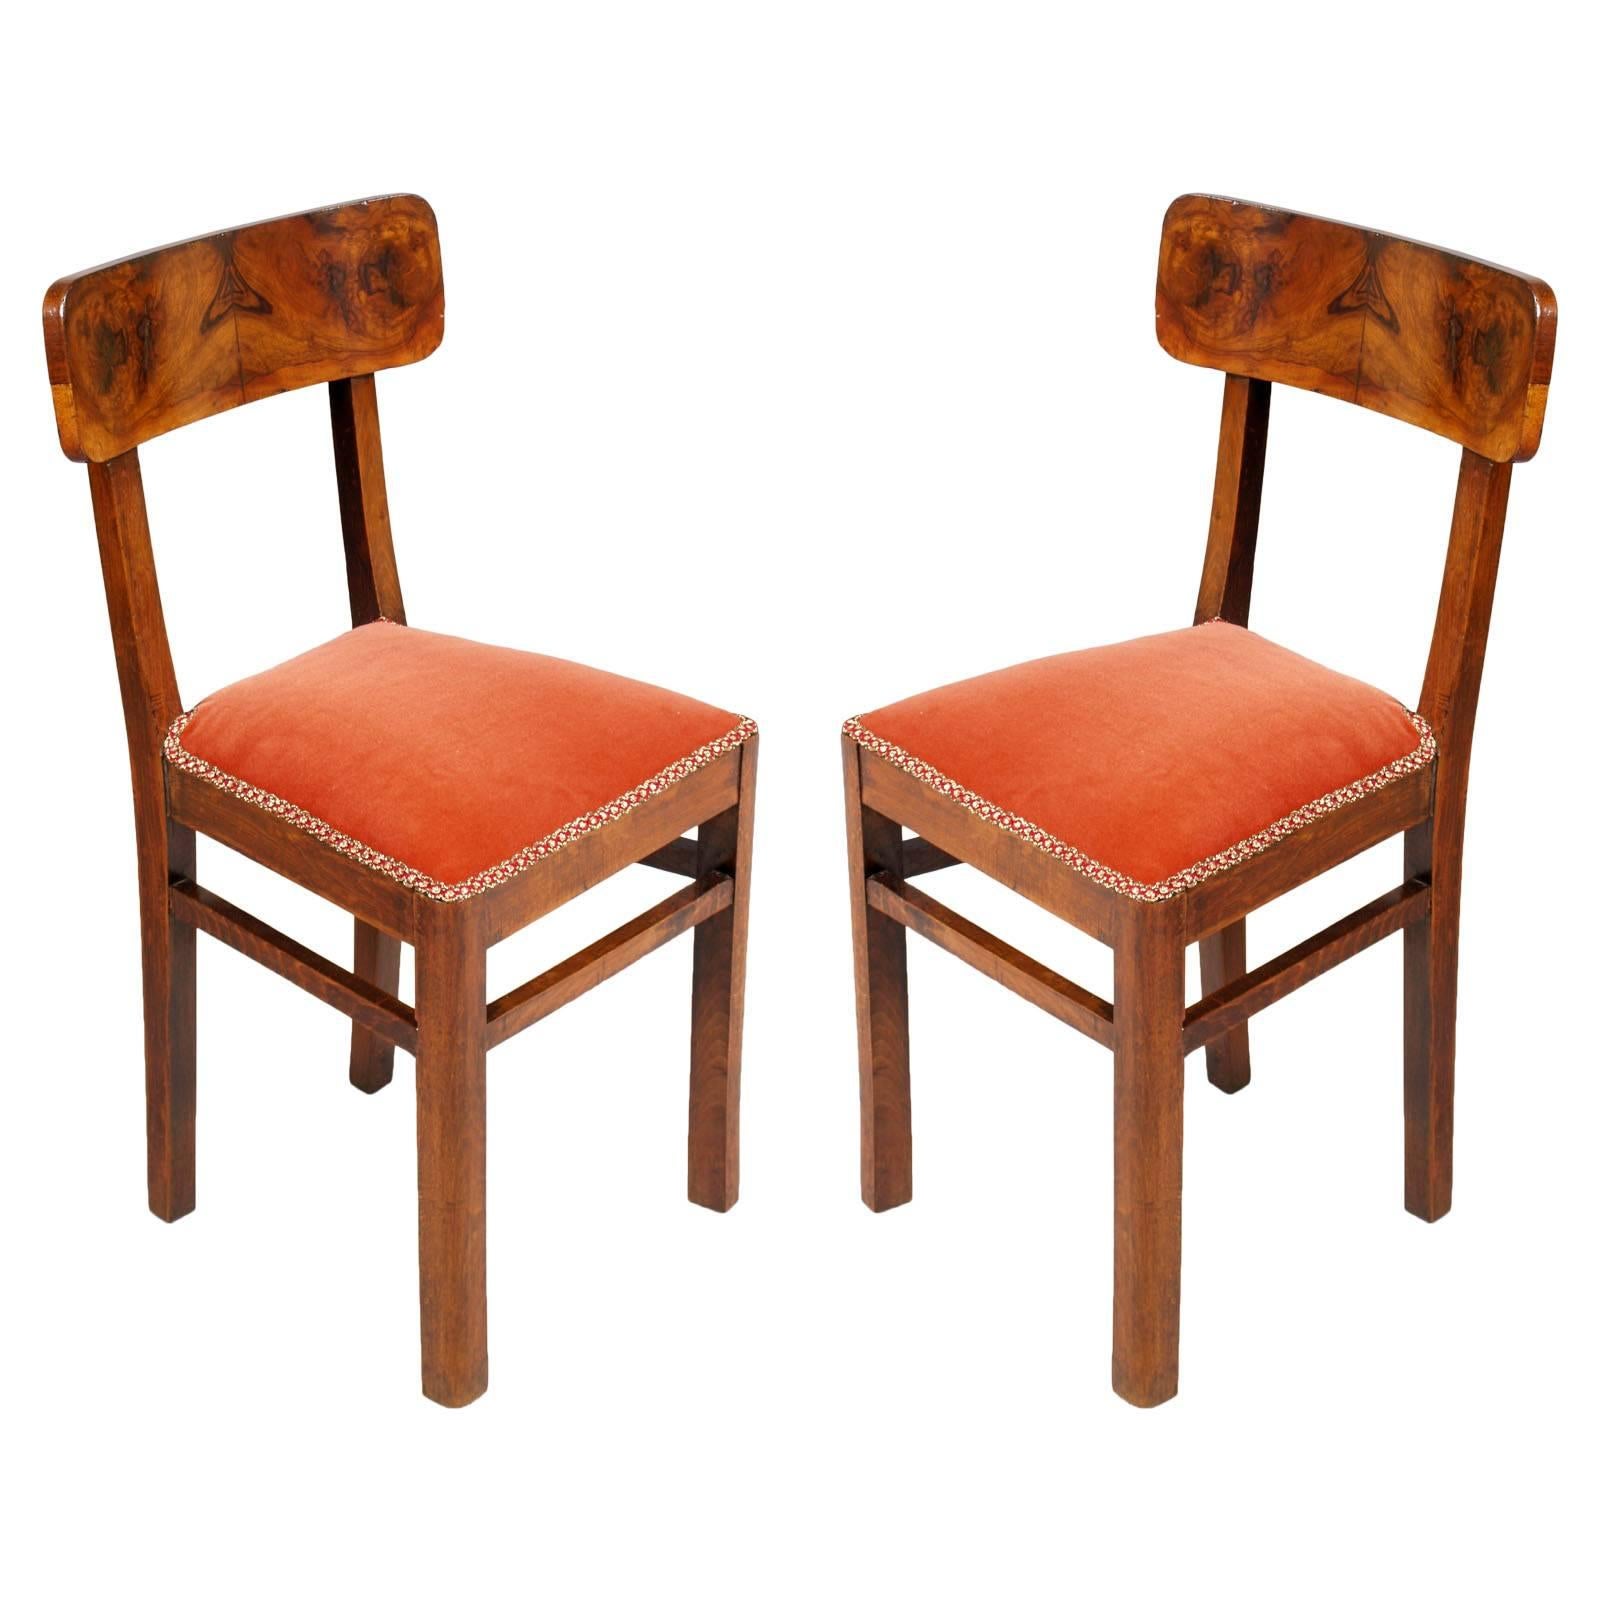 Pair of 1930s Art Deco Chairs in Walnut and Burl Walnut